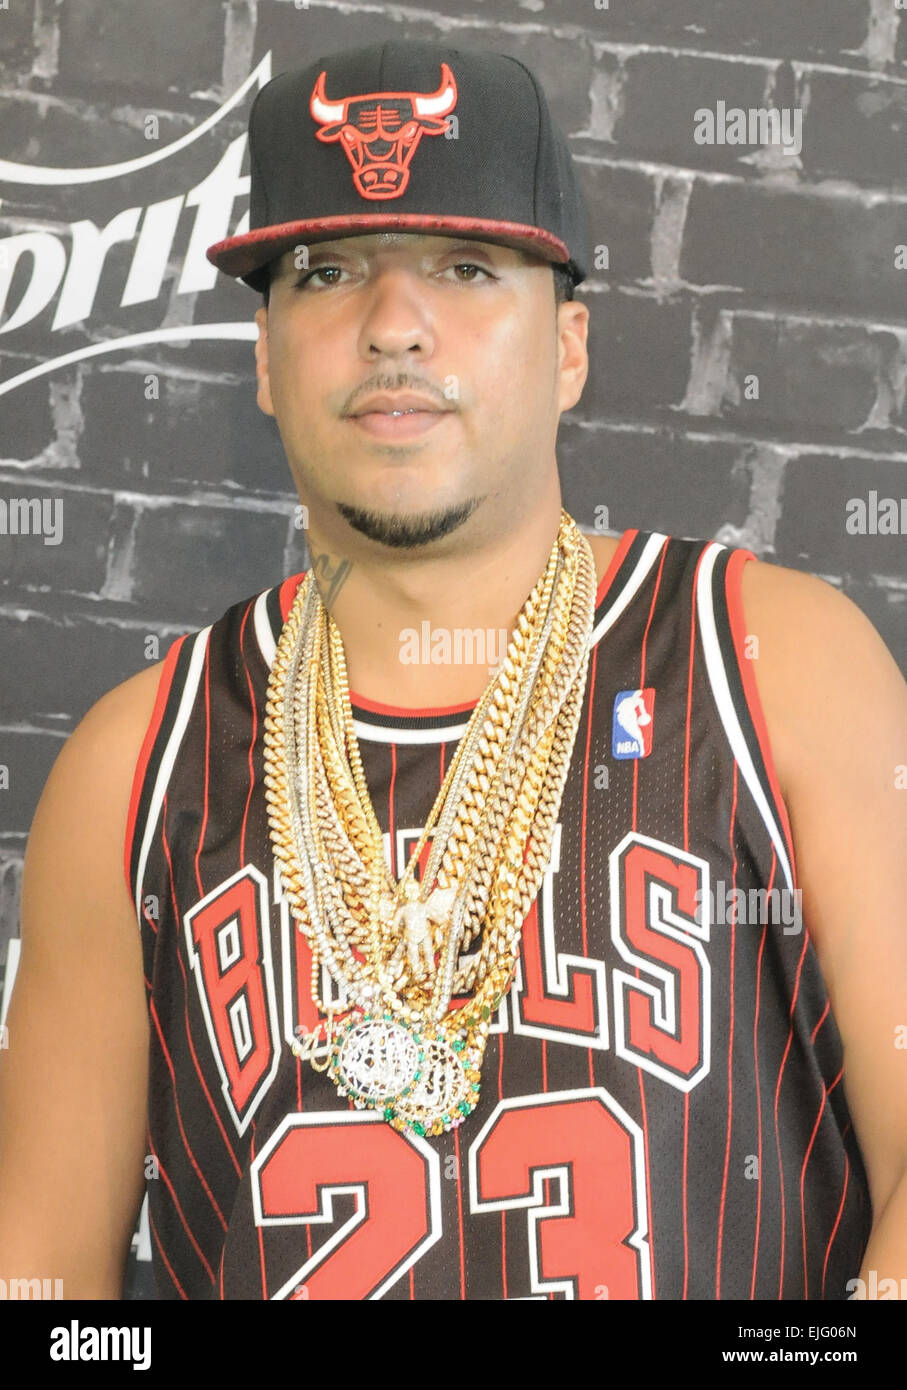 2014 BET Hip Hop Awards presented by Sprite held at The Atlanta Civic Center - Arrivals Featuring: French Montana Where: Atlanta, Georgia, United States When: 20 Sep 2014 Stock Photo